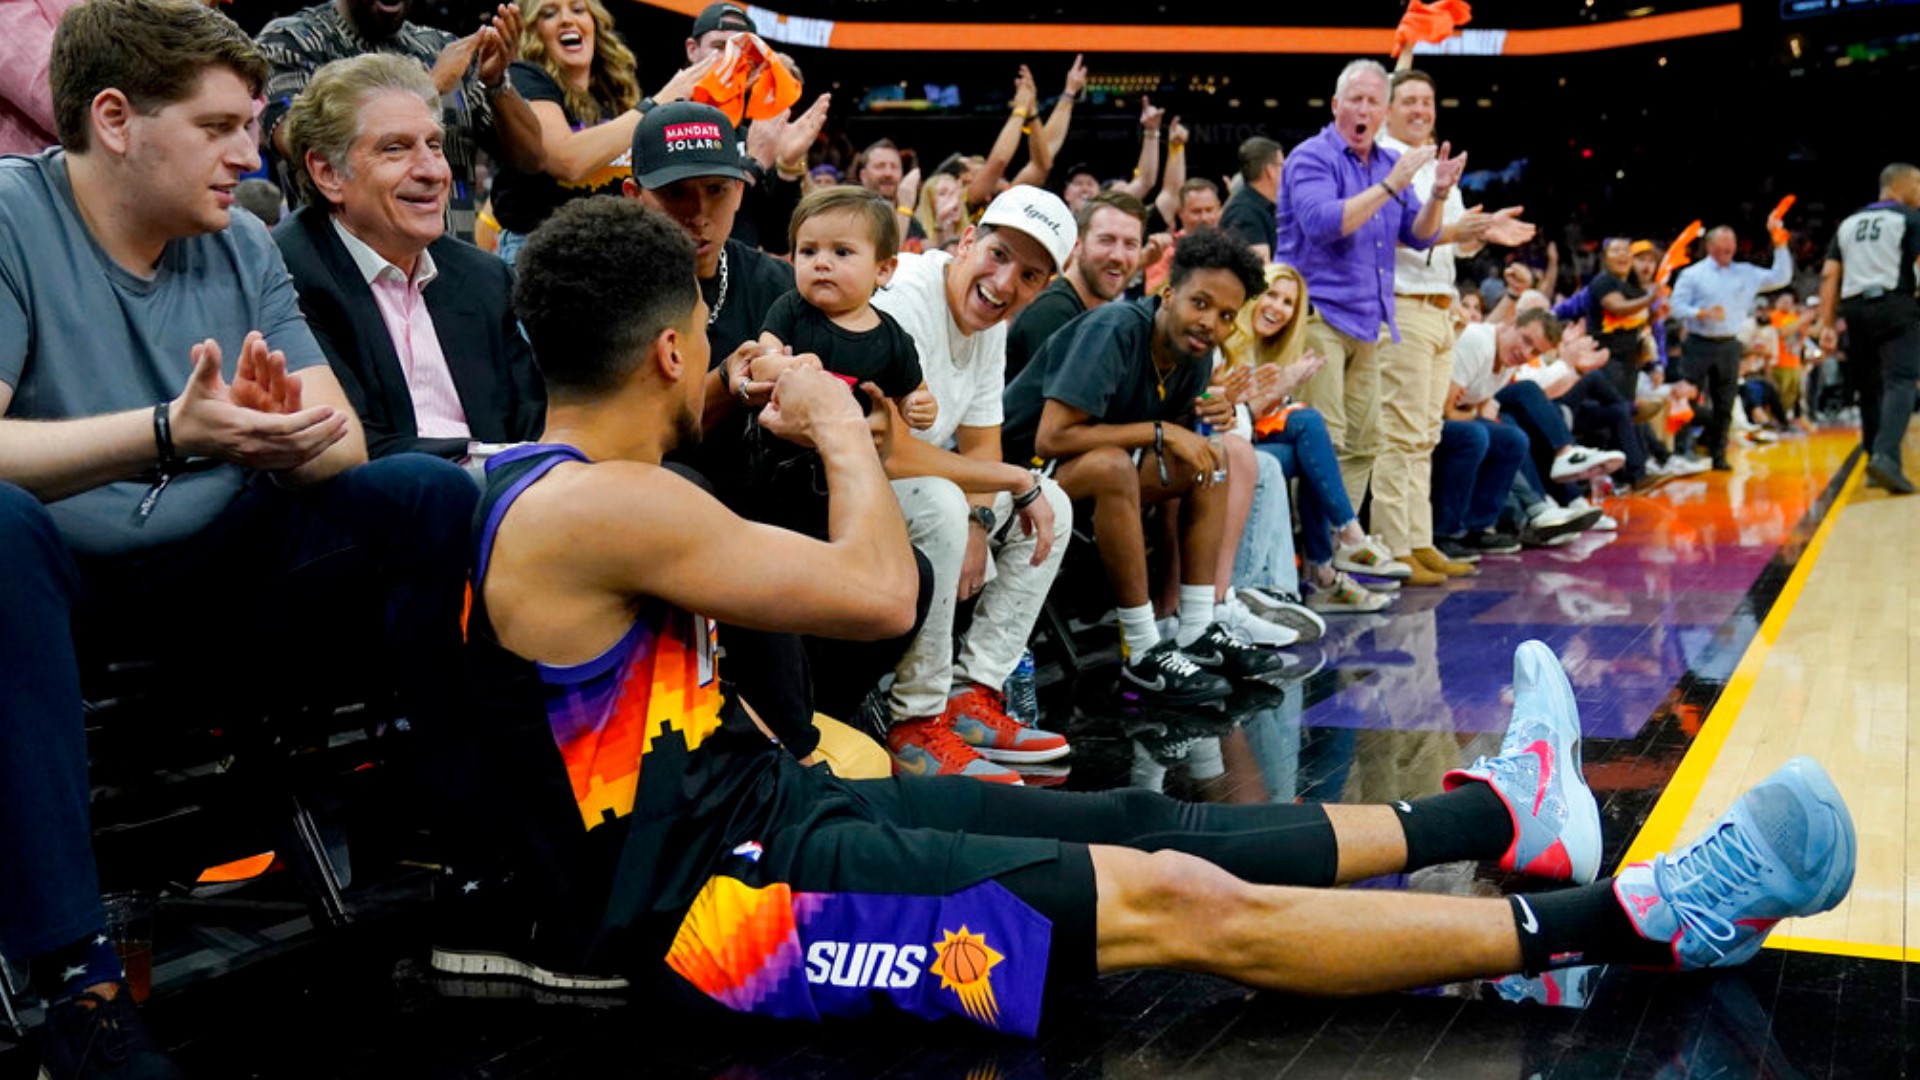 Devin Booker Fist Bumps A Baby During NBA Playoff Game – Hollywood